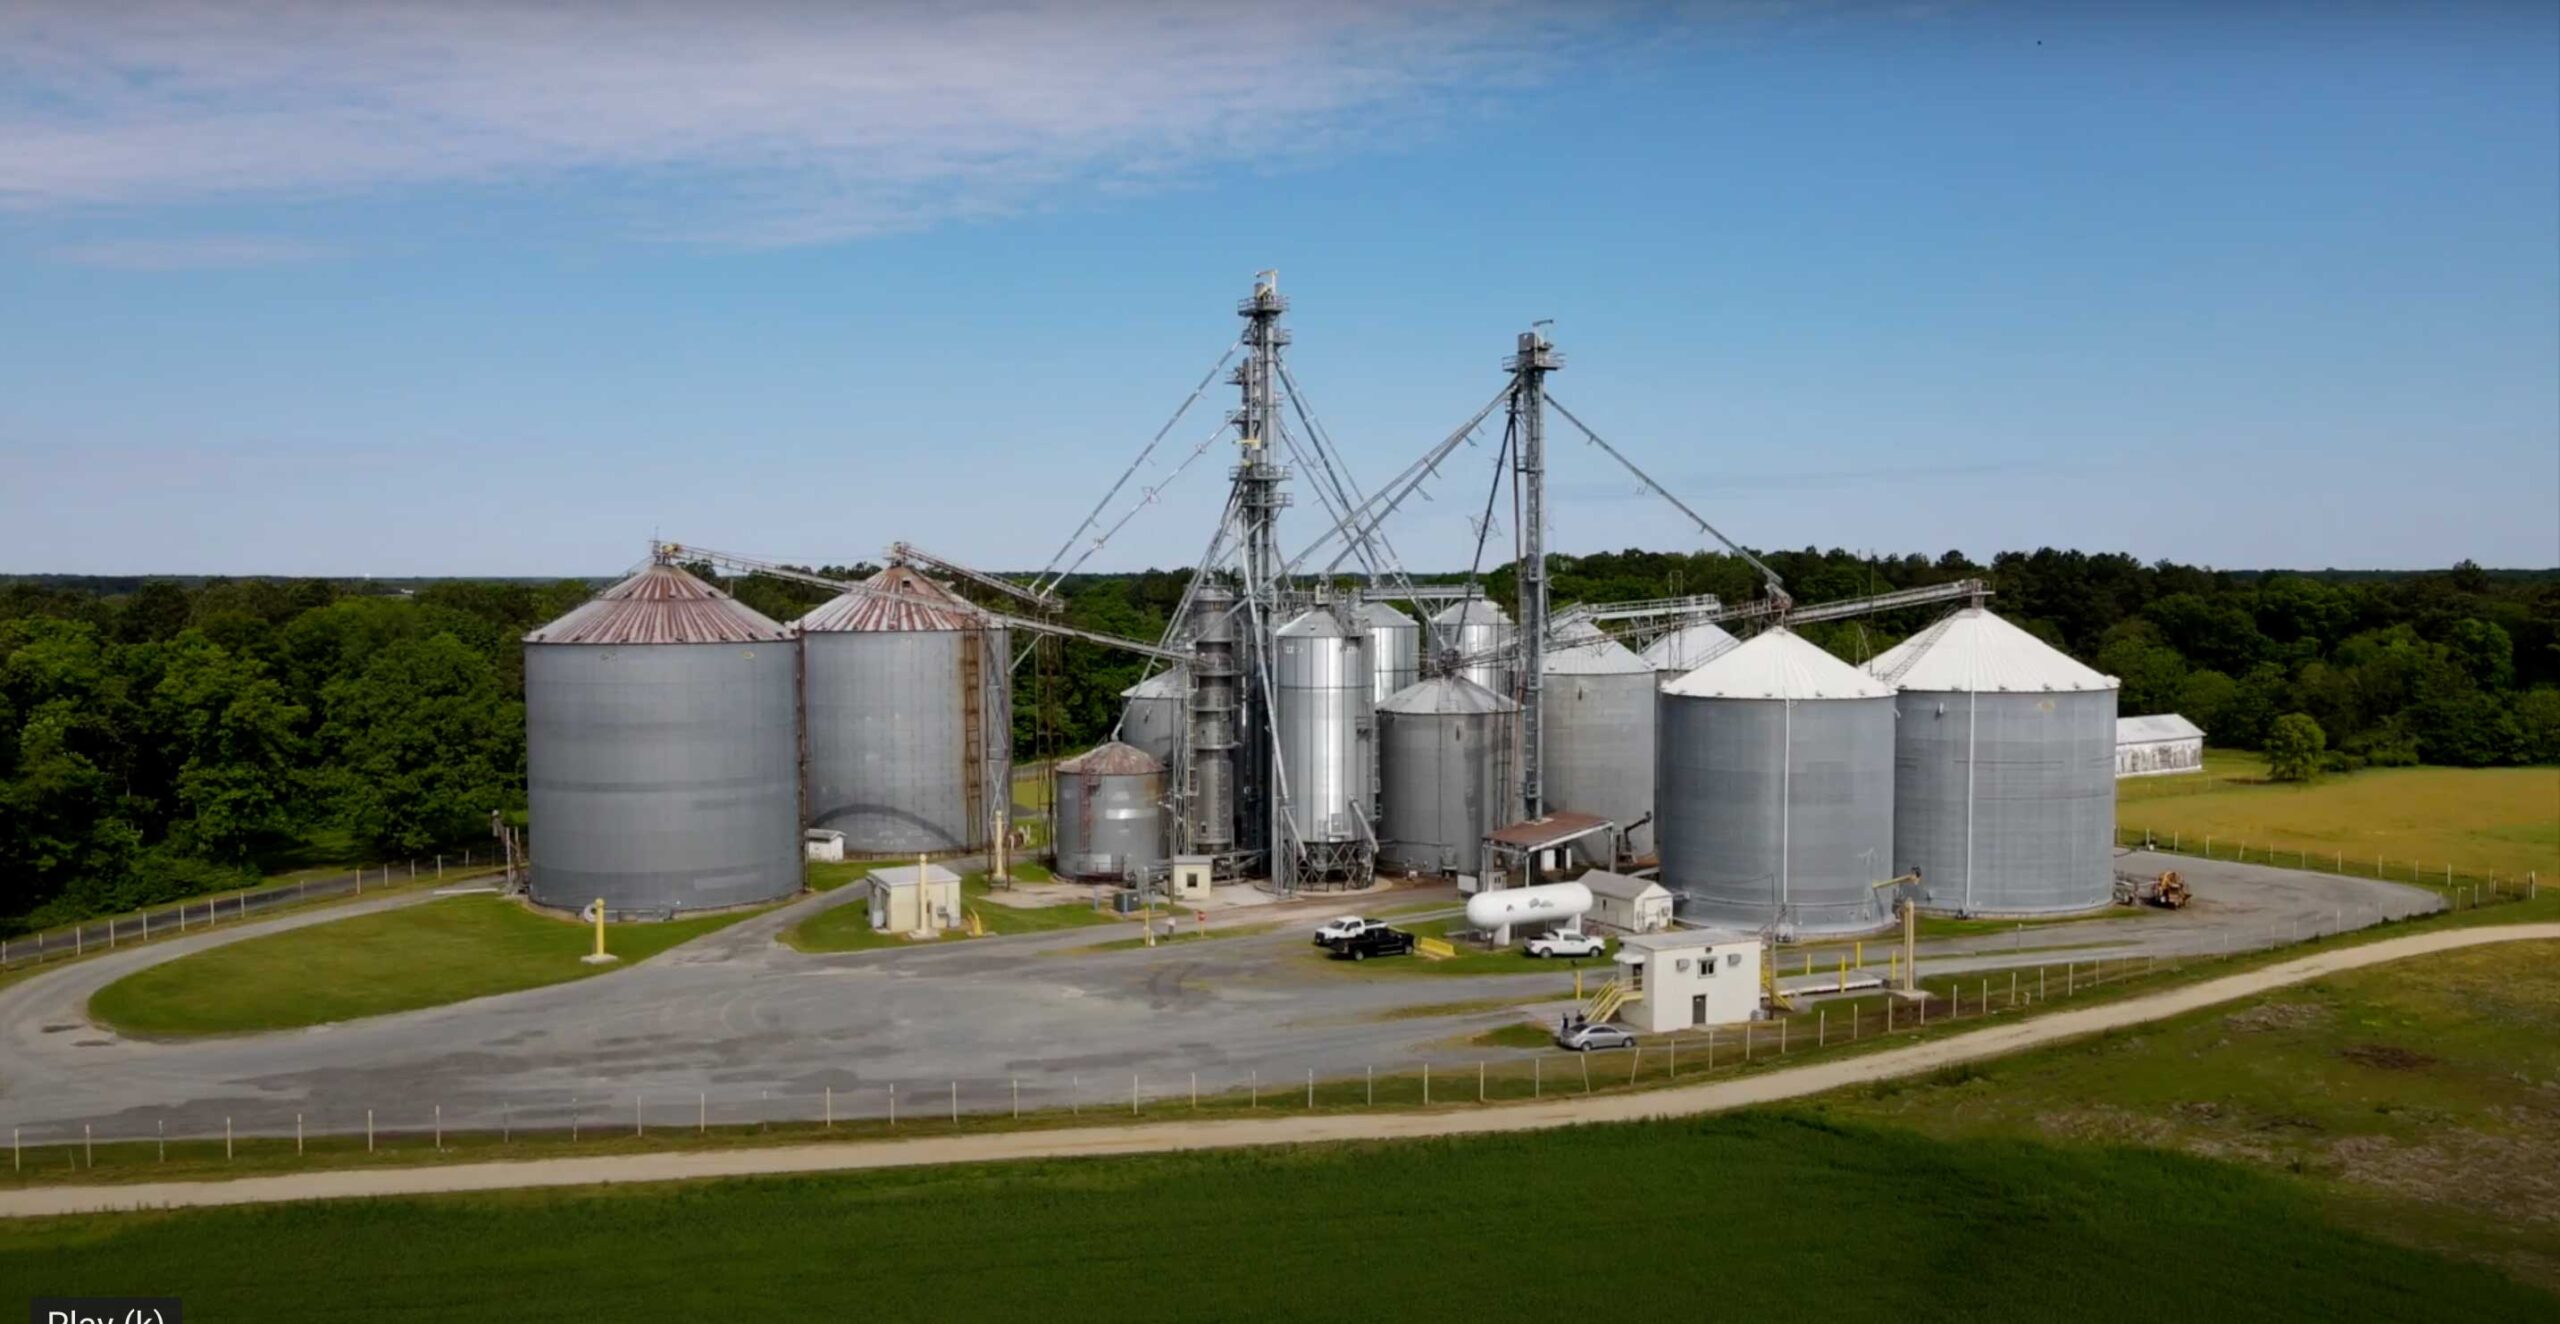 Aerial view of industrial silos.